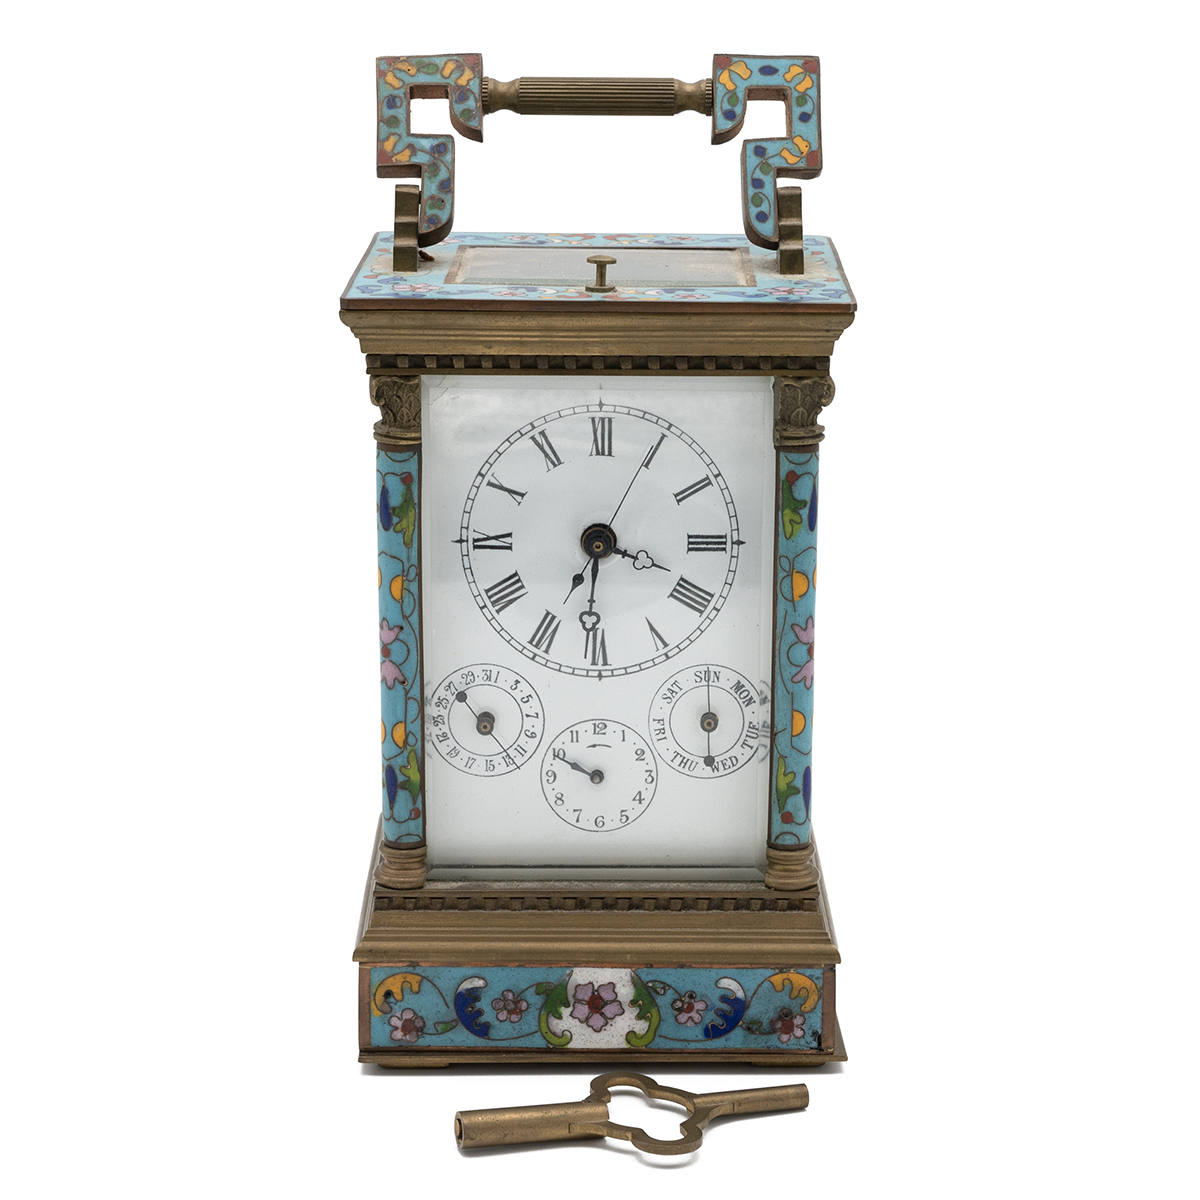 20th century brass and enamel carriage clock with repeater and alarm function and day of week and... - Image 2 of 5